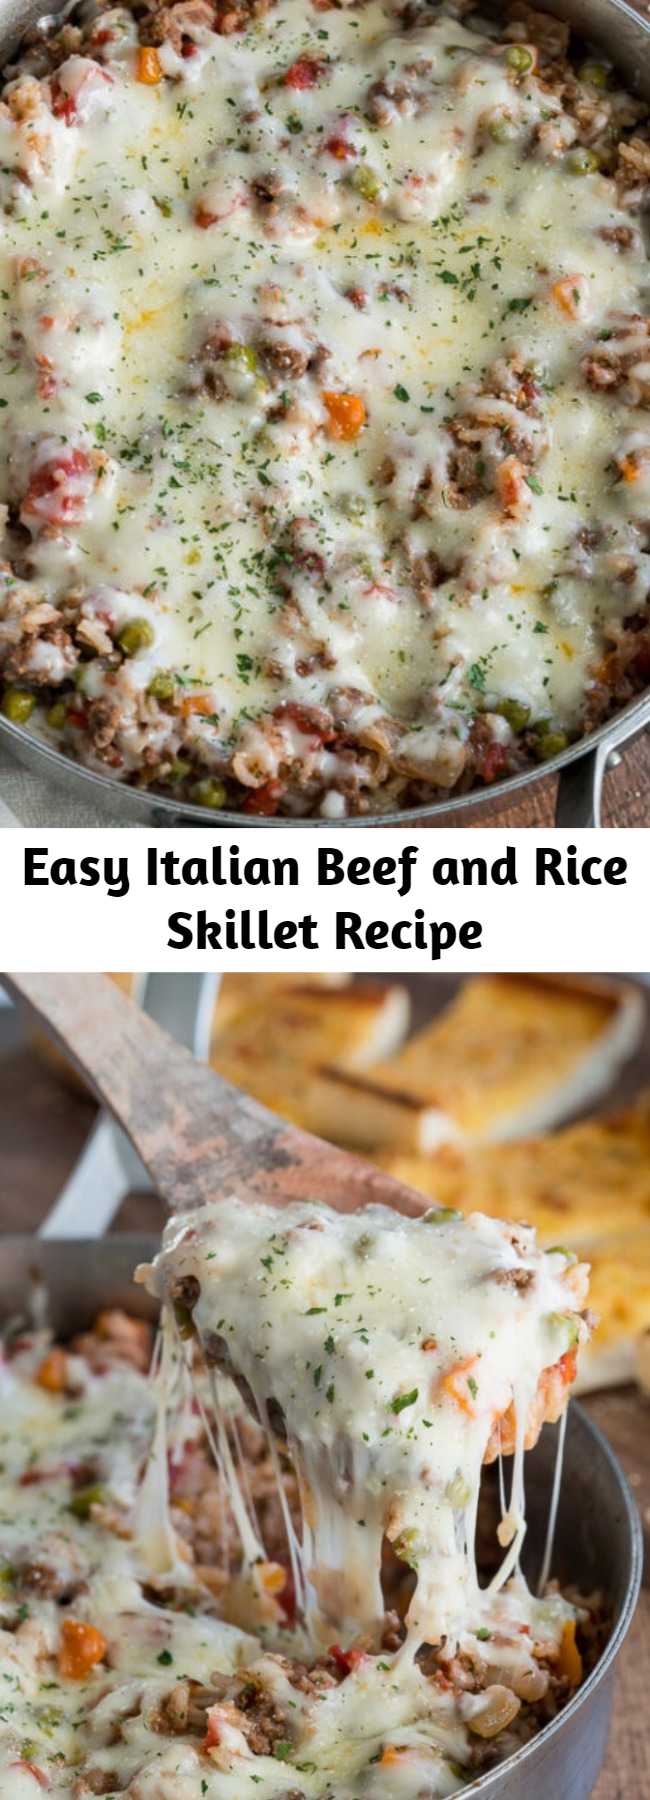 Easy Italian Beef and Rice Skillet Recipe - This hearty and cheesy Italian Beef and Rice Skillet is ready in less than 30 minutes for an easy weeknight dinner the whole family will love!